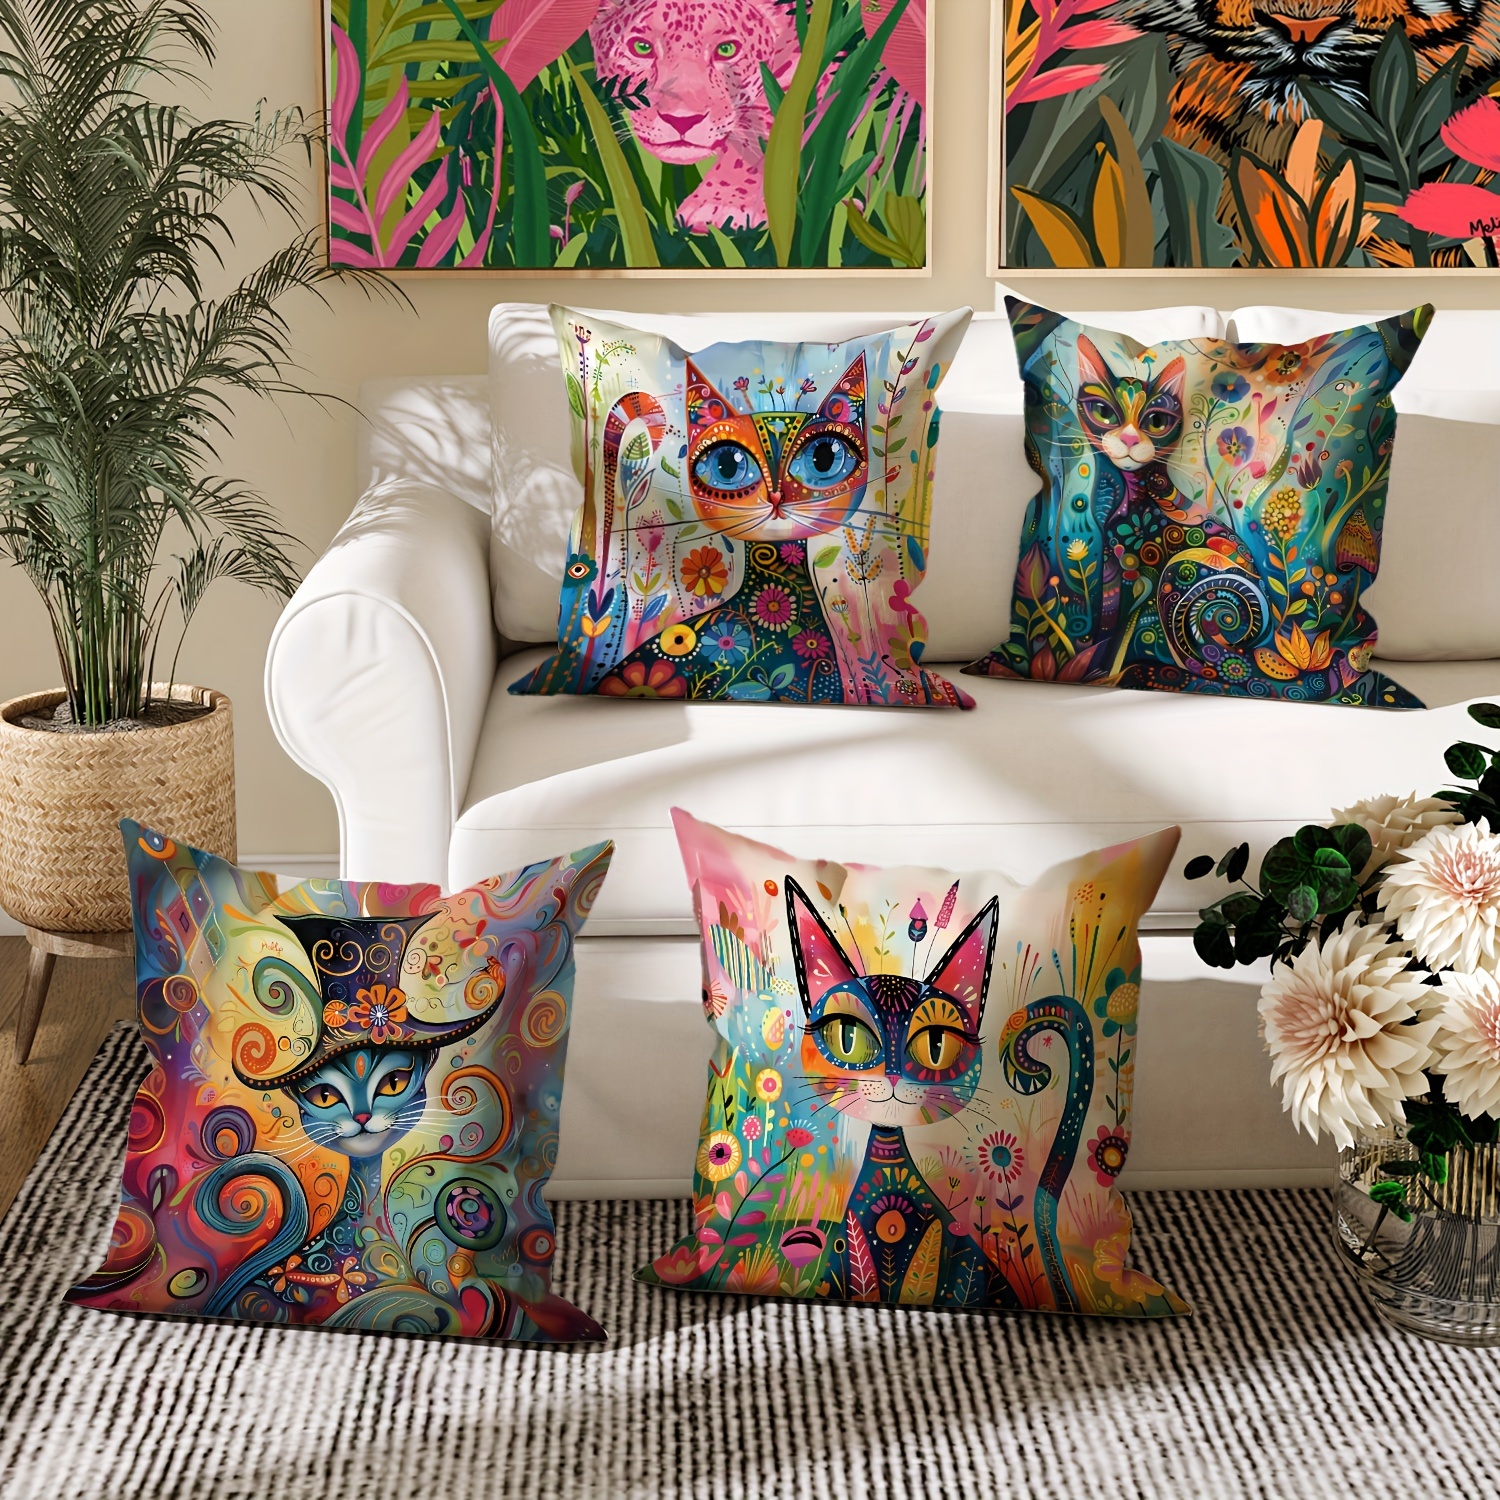 

4pcs Velvet Cartoon Cat Throw Pillow Covers 18x18 Inch - Contemporary Style, Machine Washable, Zipper Closure, Woven Polyester, Decorative Abstract Animal Floral Design For Living Room And Bedroom